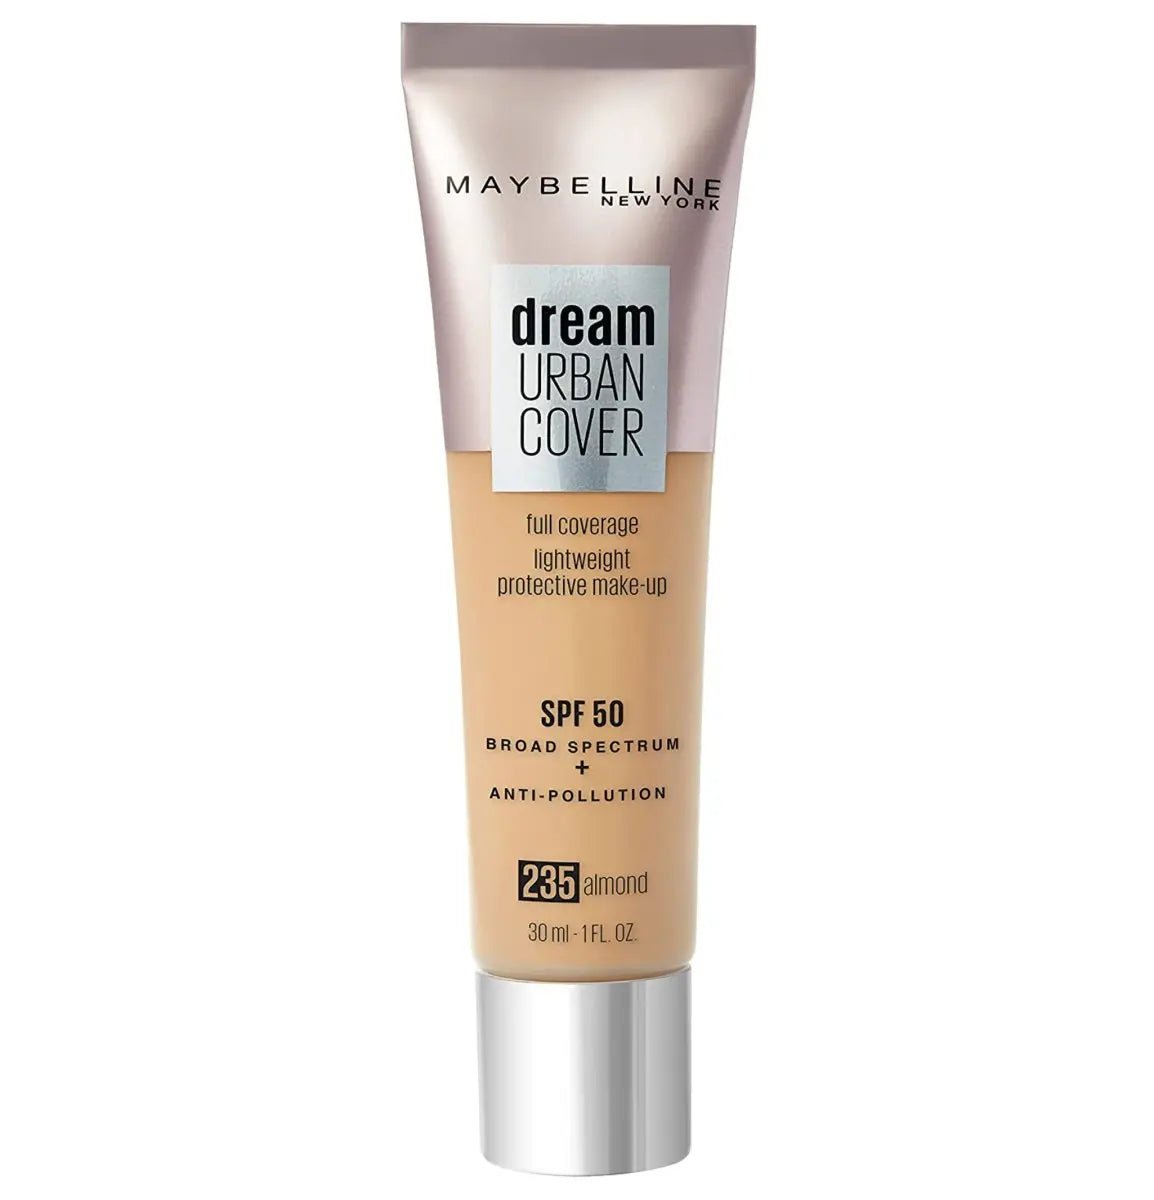 Image of Maybelline Dream Urban Cover Foundation - 235 Almond